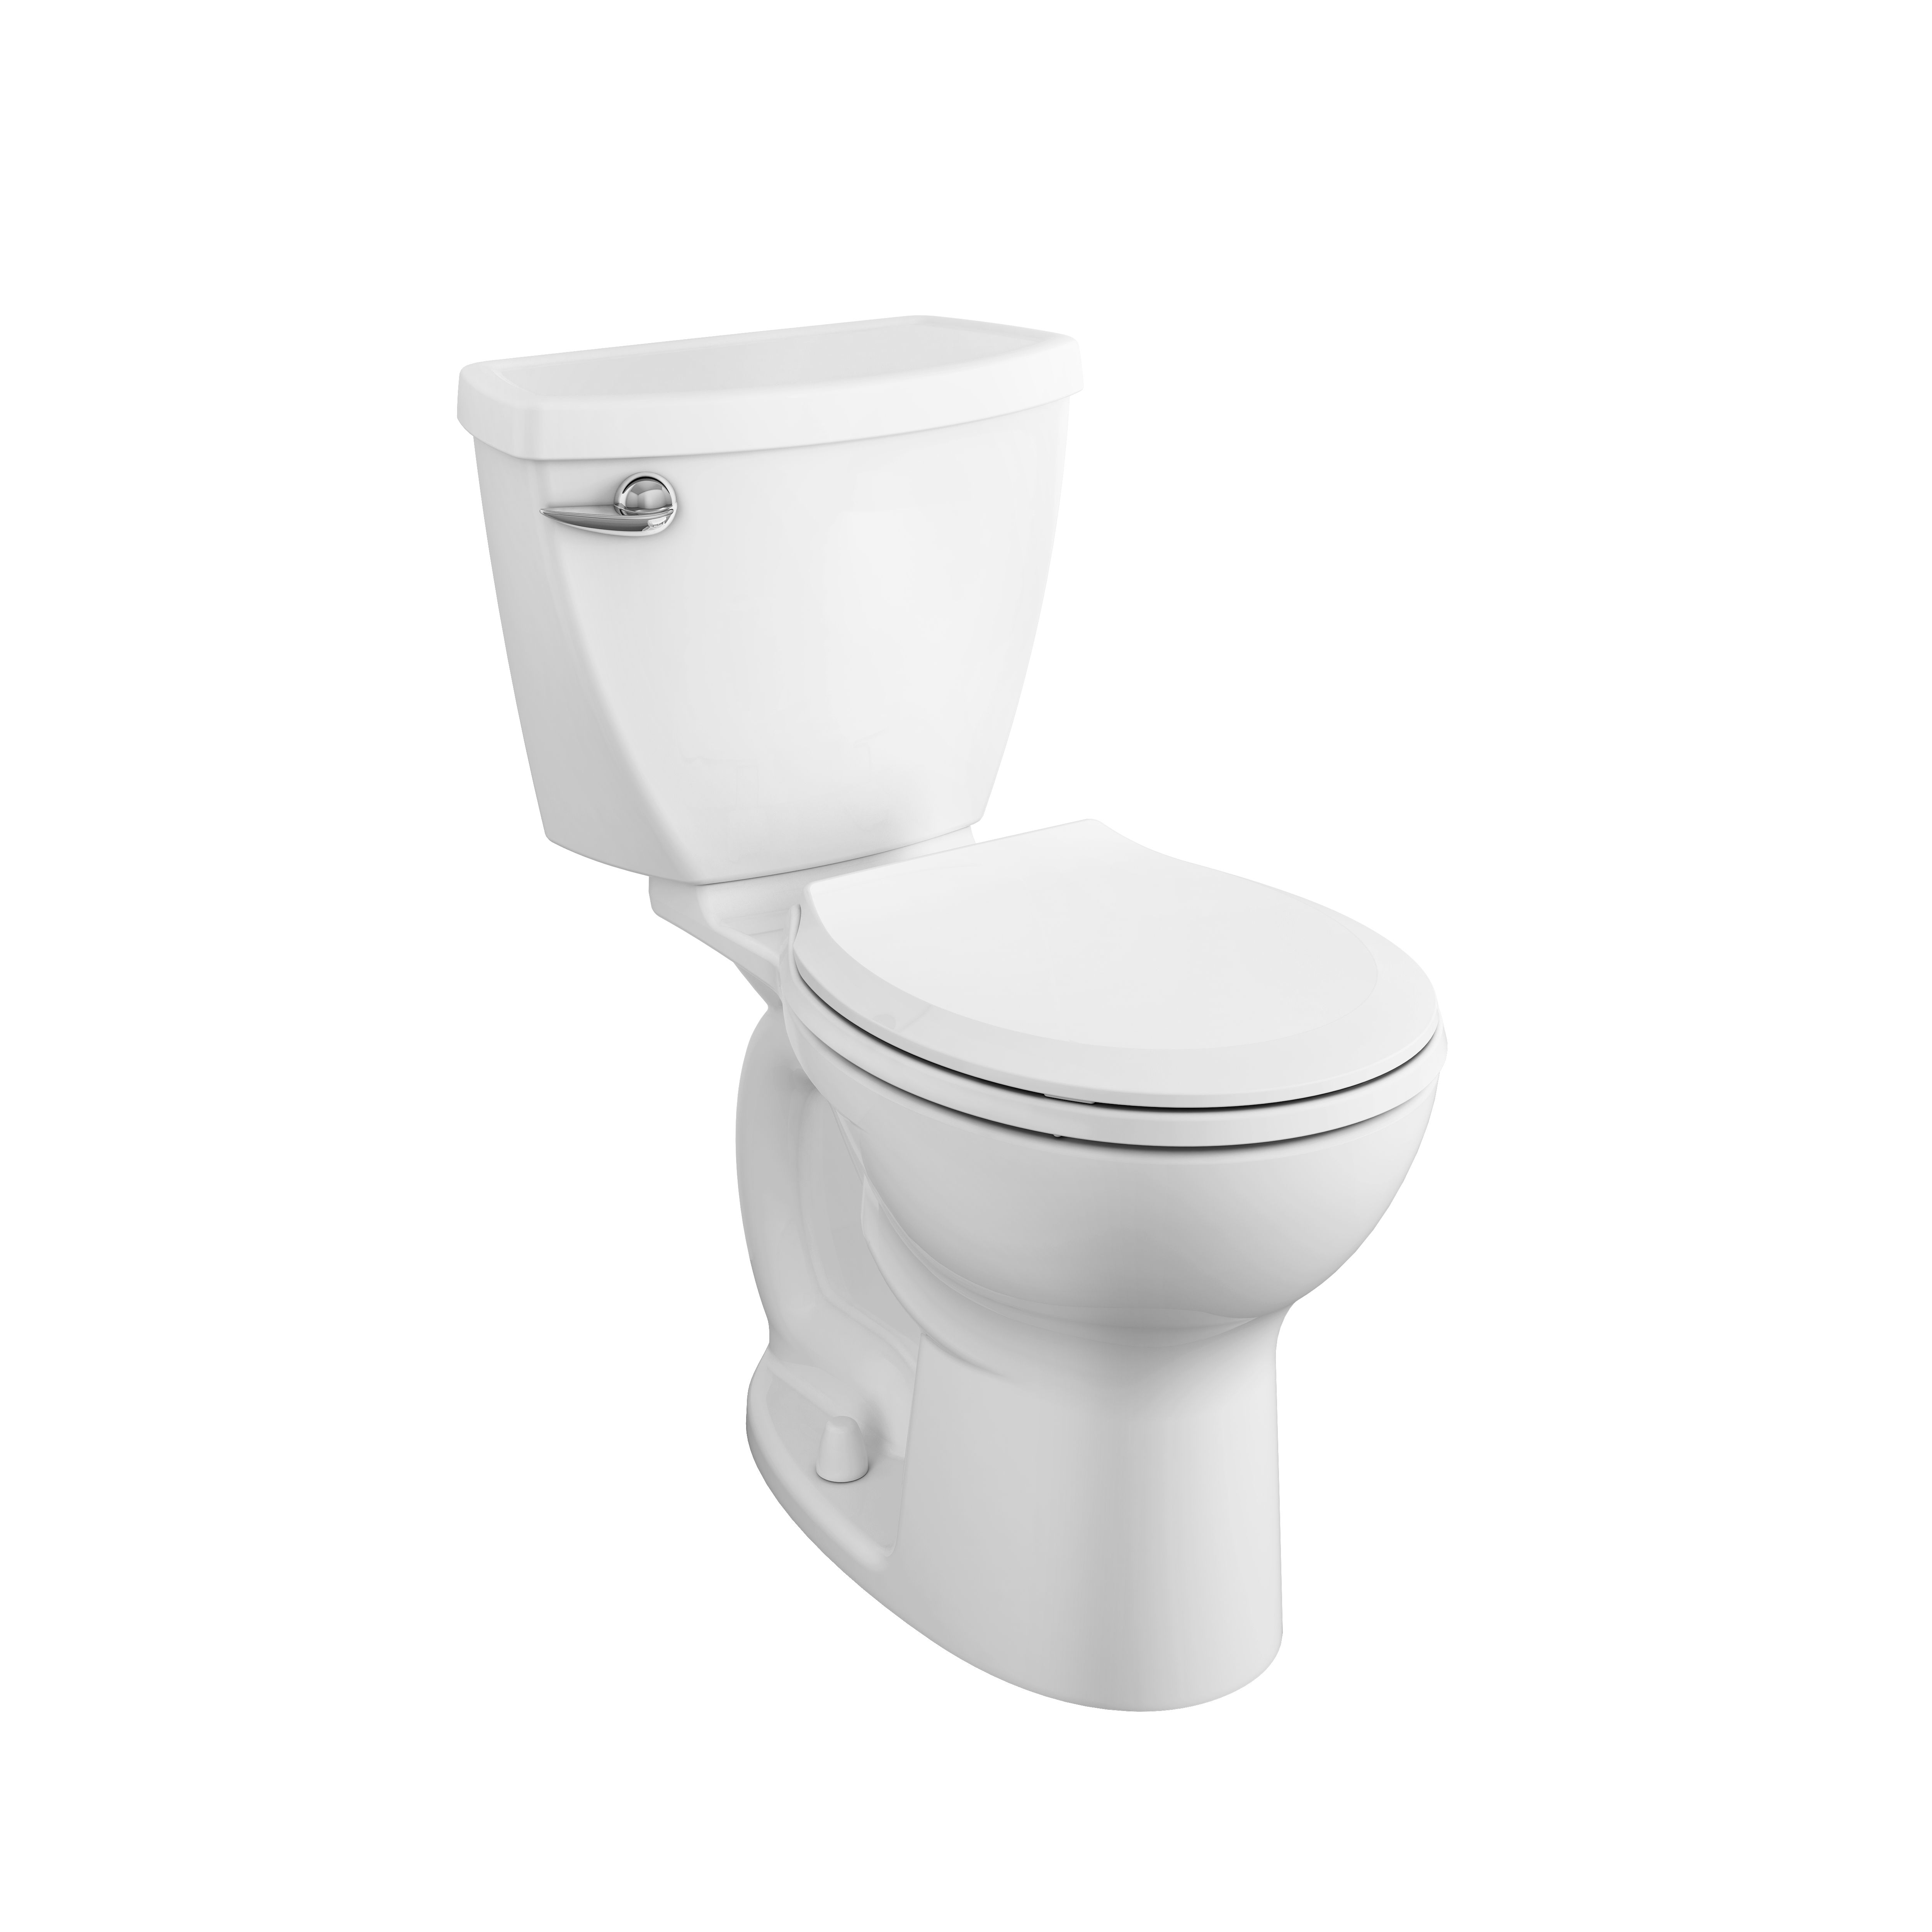 Cadet 3 Two-Piece 1.28 gpf/4.8 Lpf Standard Height Round Front Complete Toilet With Seat and Lined Tank